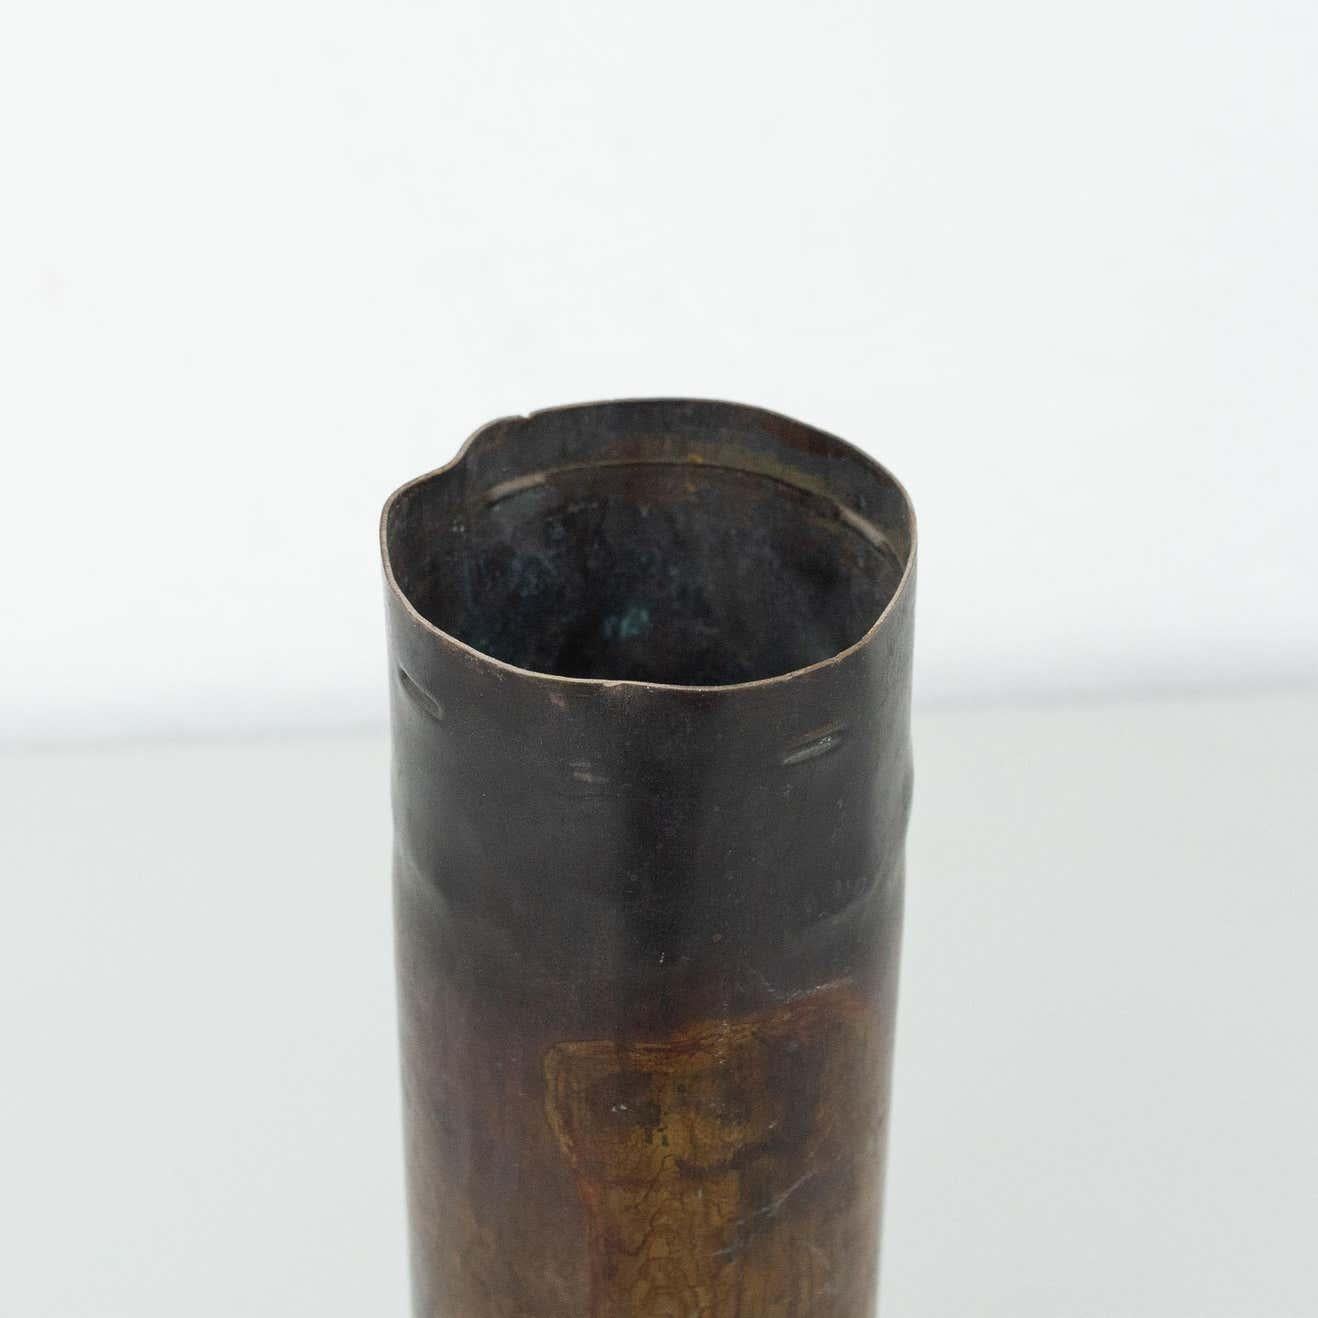 Set of three bronze vases.
By unknown manufacturer from Spain, circa 1930.
Previous use was bullets.

In original condition, with minor wear consistent with age and use, preserving a beautiful patina.

Material:
Bronze

Dimensions:
1: Ø 6 cm x H 31